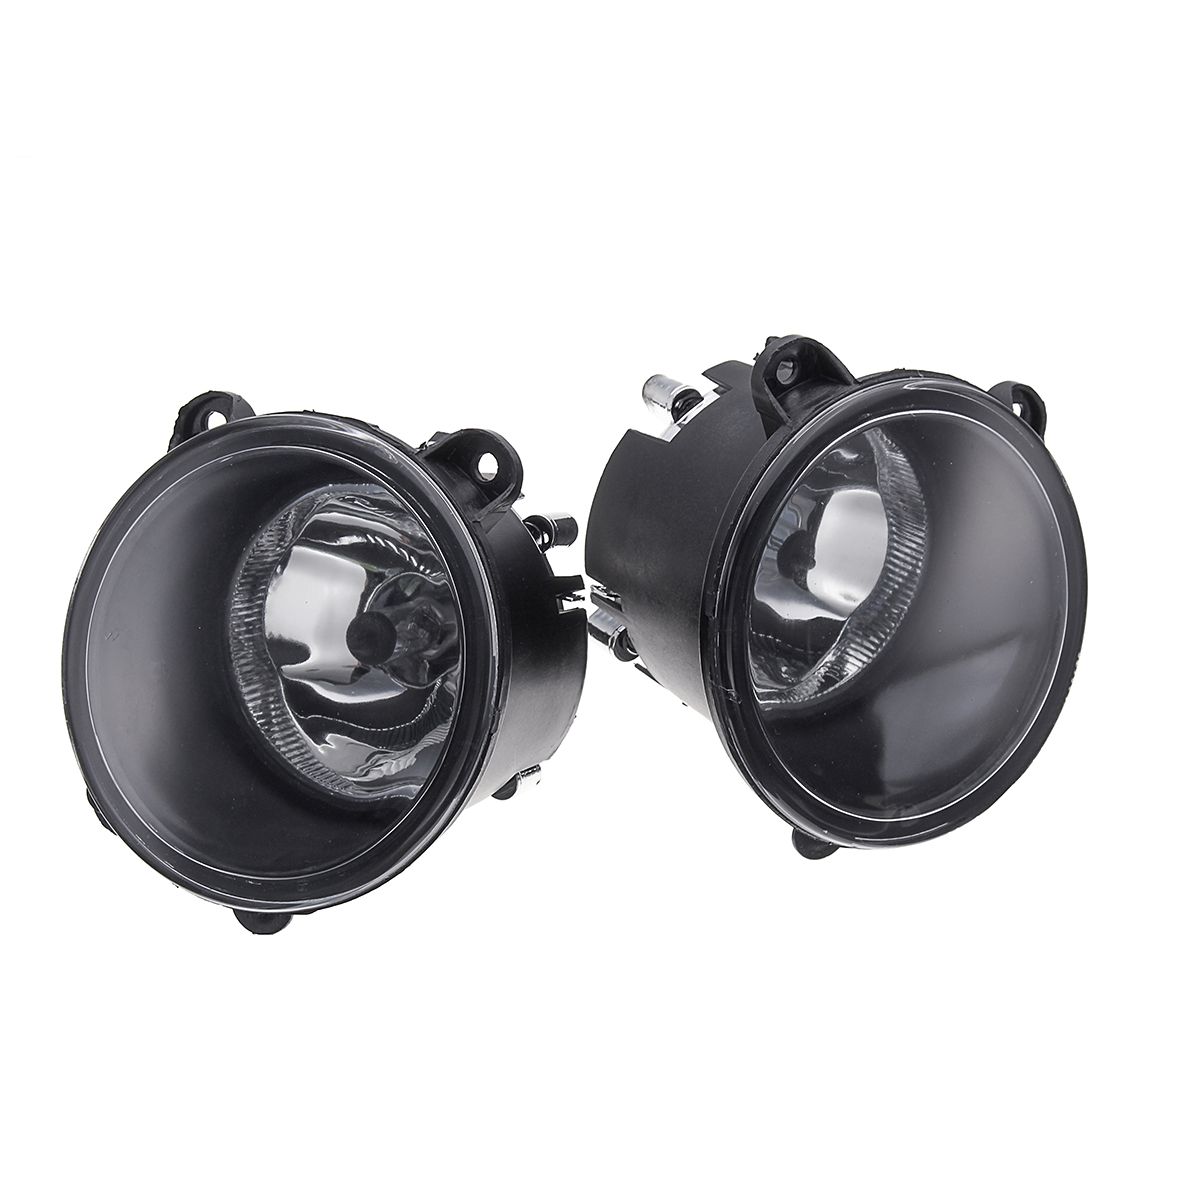 Car-Front-Fog-Lights-with-H11-Halogen-Bulbs-Pair-For-Land-Rover-Discovery-3-Range-Rover-Sport-1583957